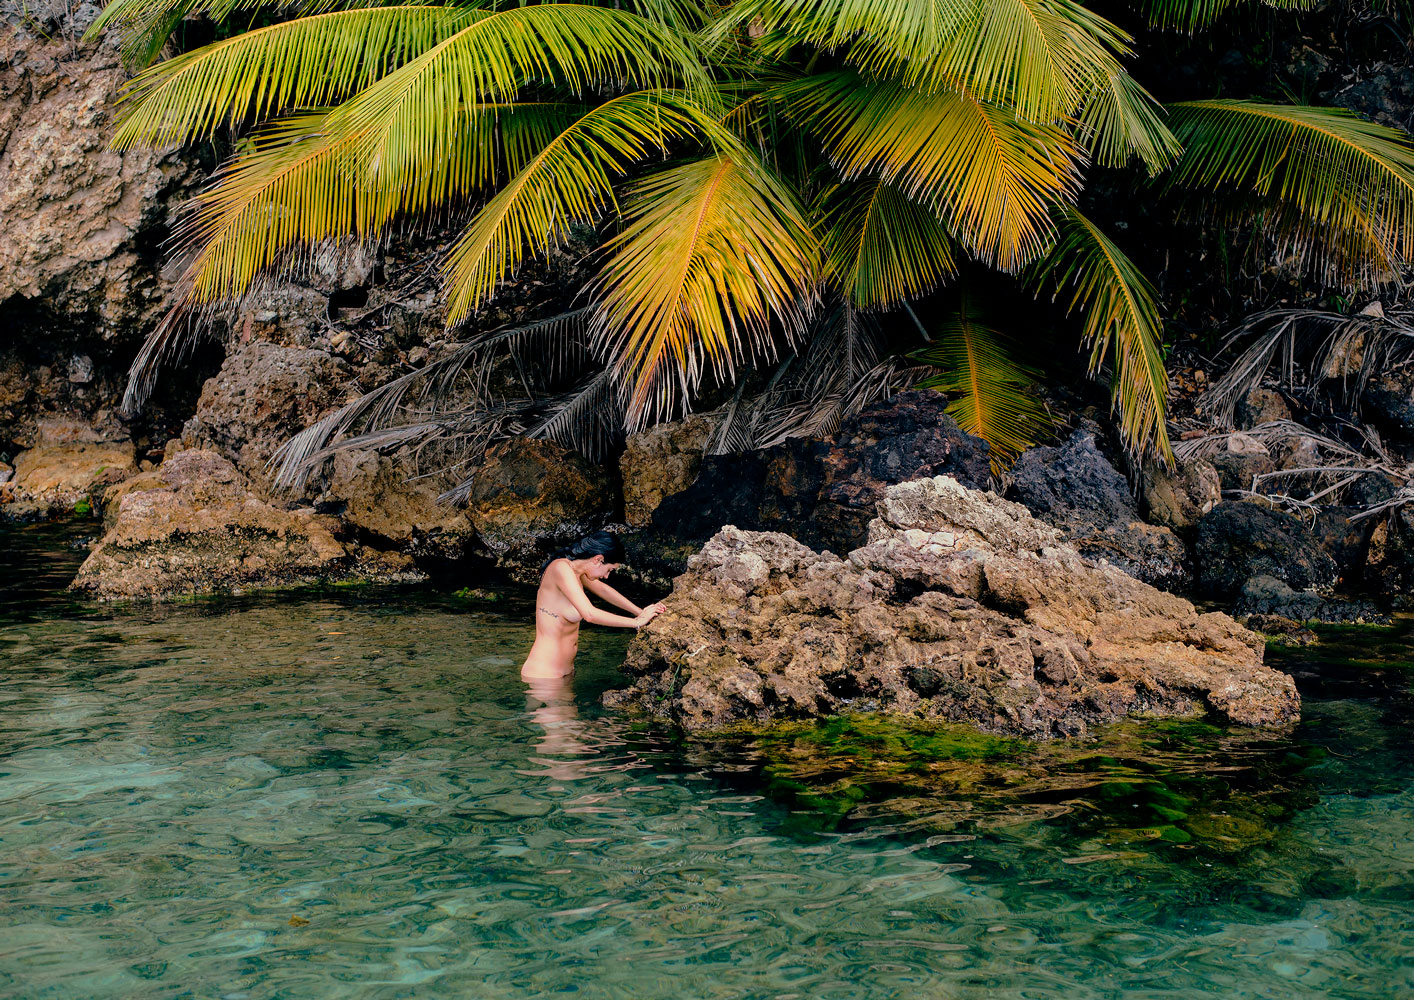 Landscape photography of a naked woman bathing in tropical waters with the title 'Sea words' - jessica daza gomez - friendmade.fm